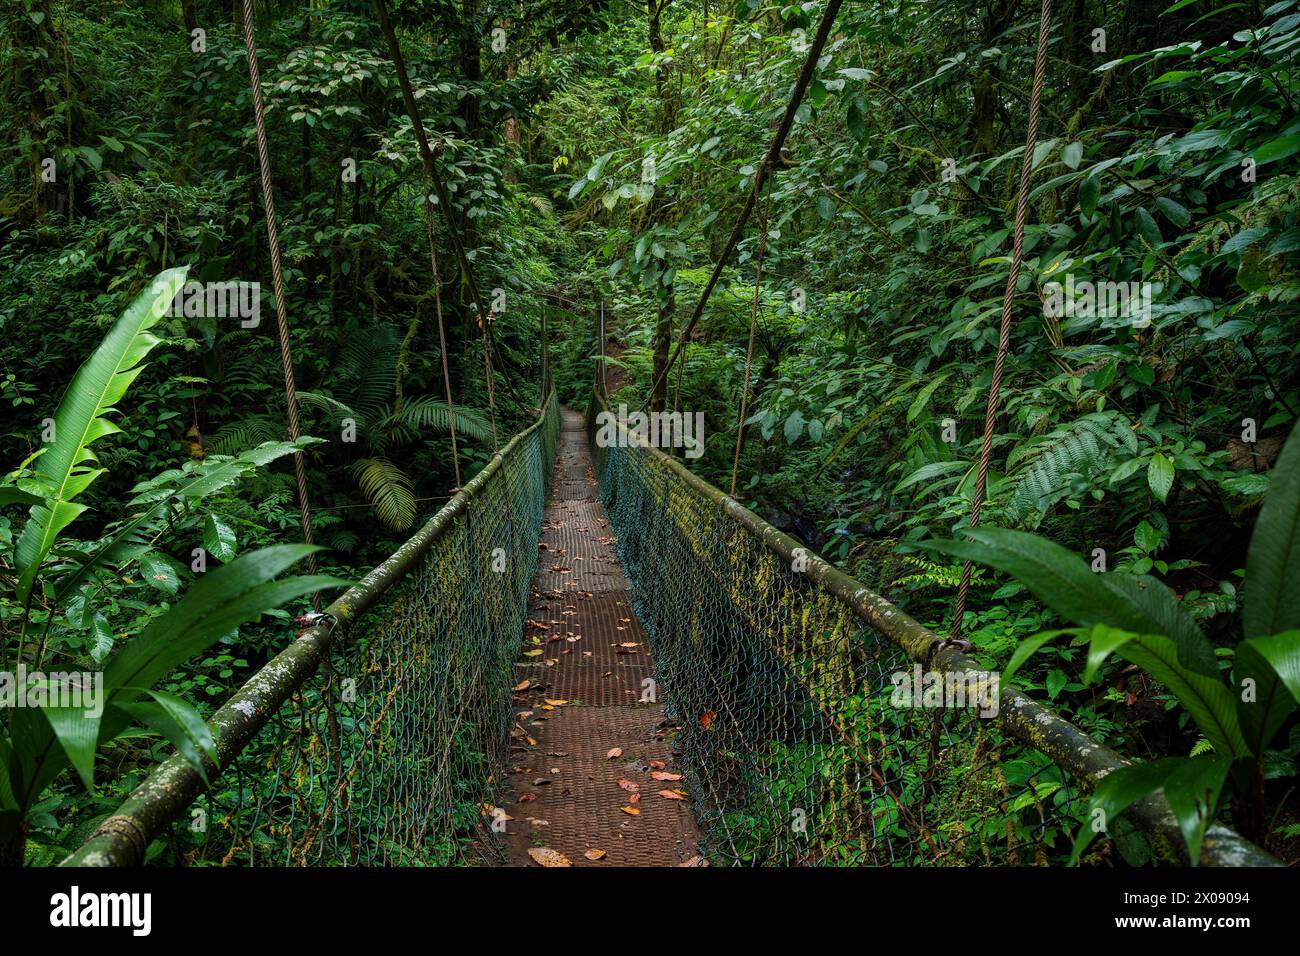 A serene image capturing a narrow suspension bridge amidst the lush foliage of a Costa Rican rainforest, invoking a sense of exploration and tranquili Stock Photo